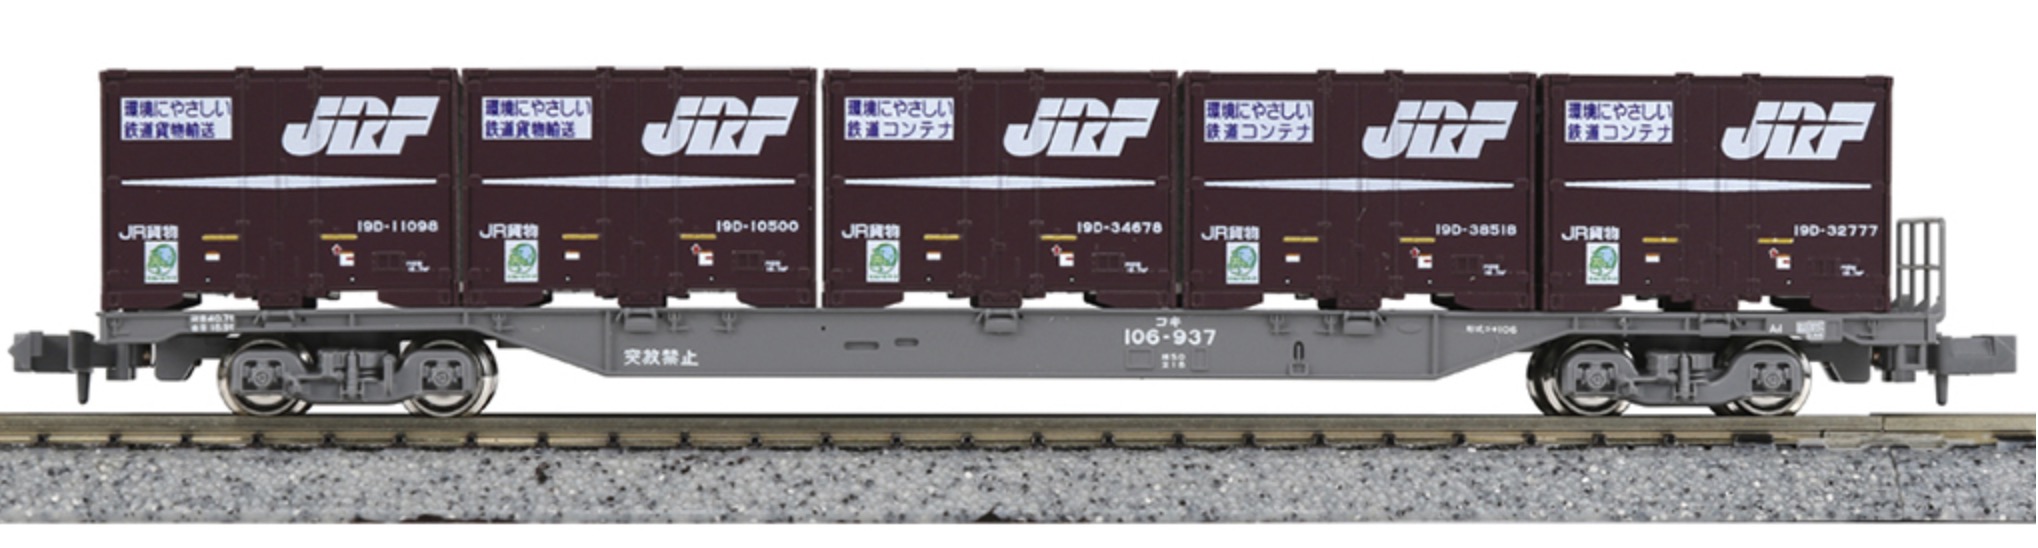 N Scale - Kato - 23-573 - Container, 12 Foot, UR19D - Japan Railways Freight - 5-Pack